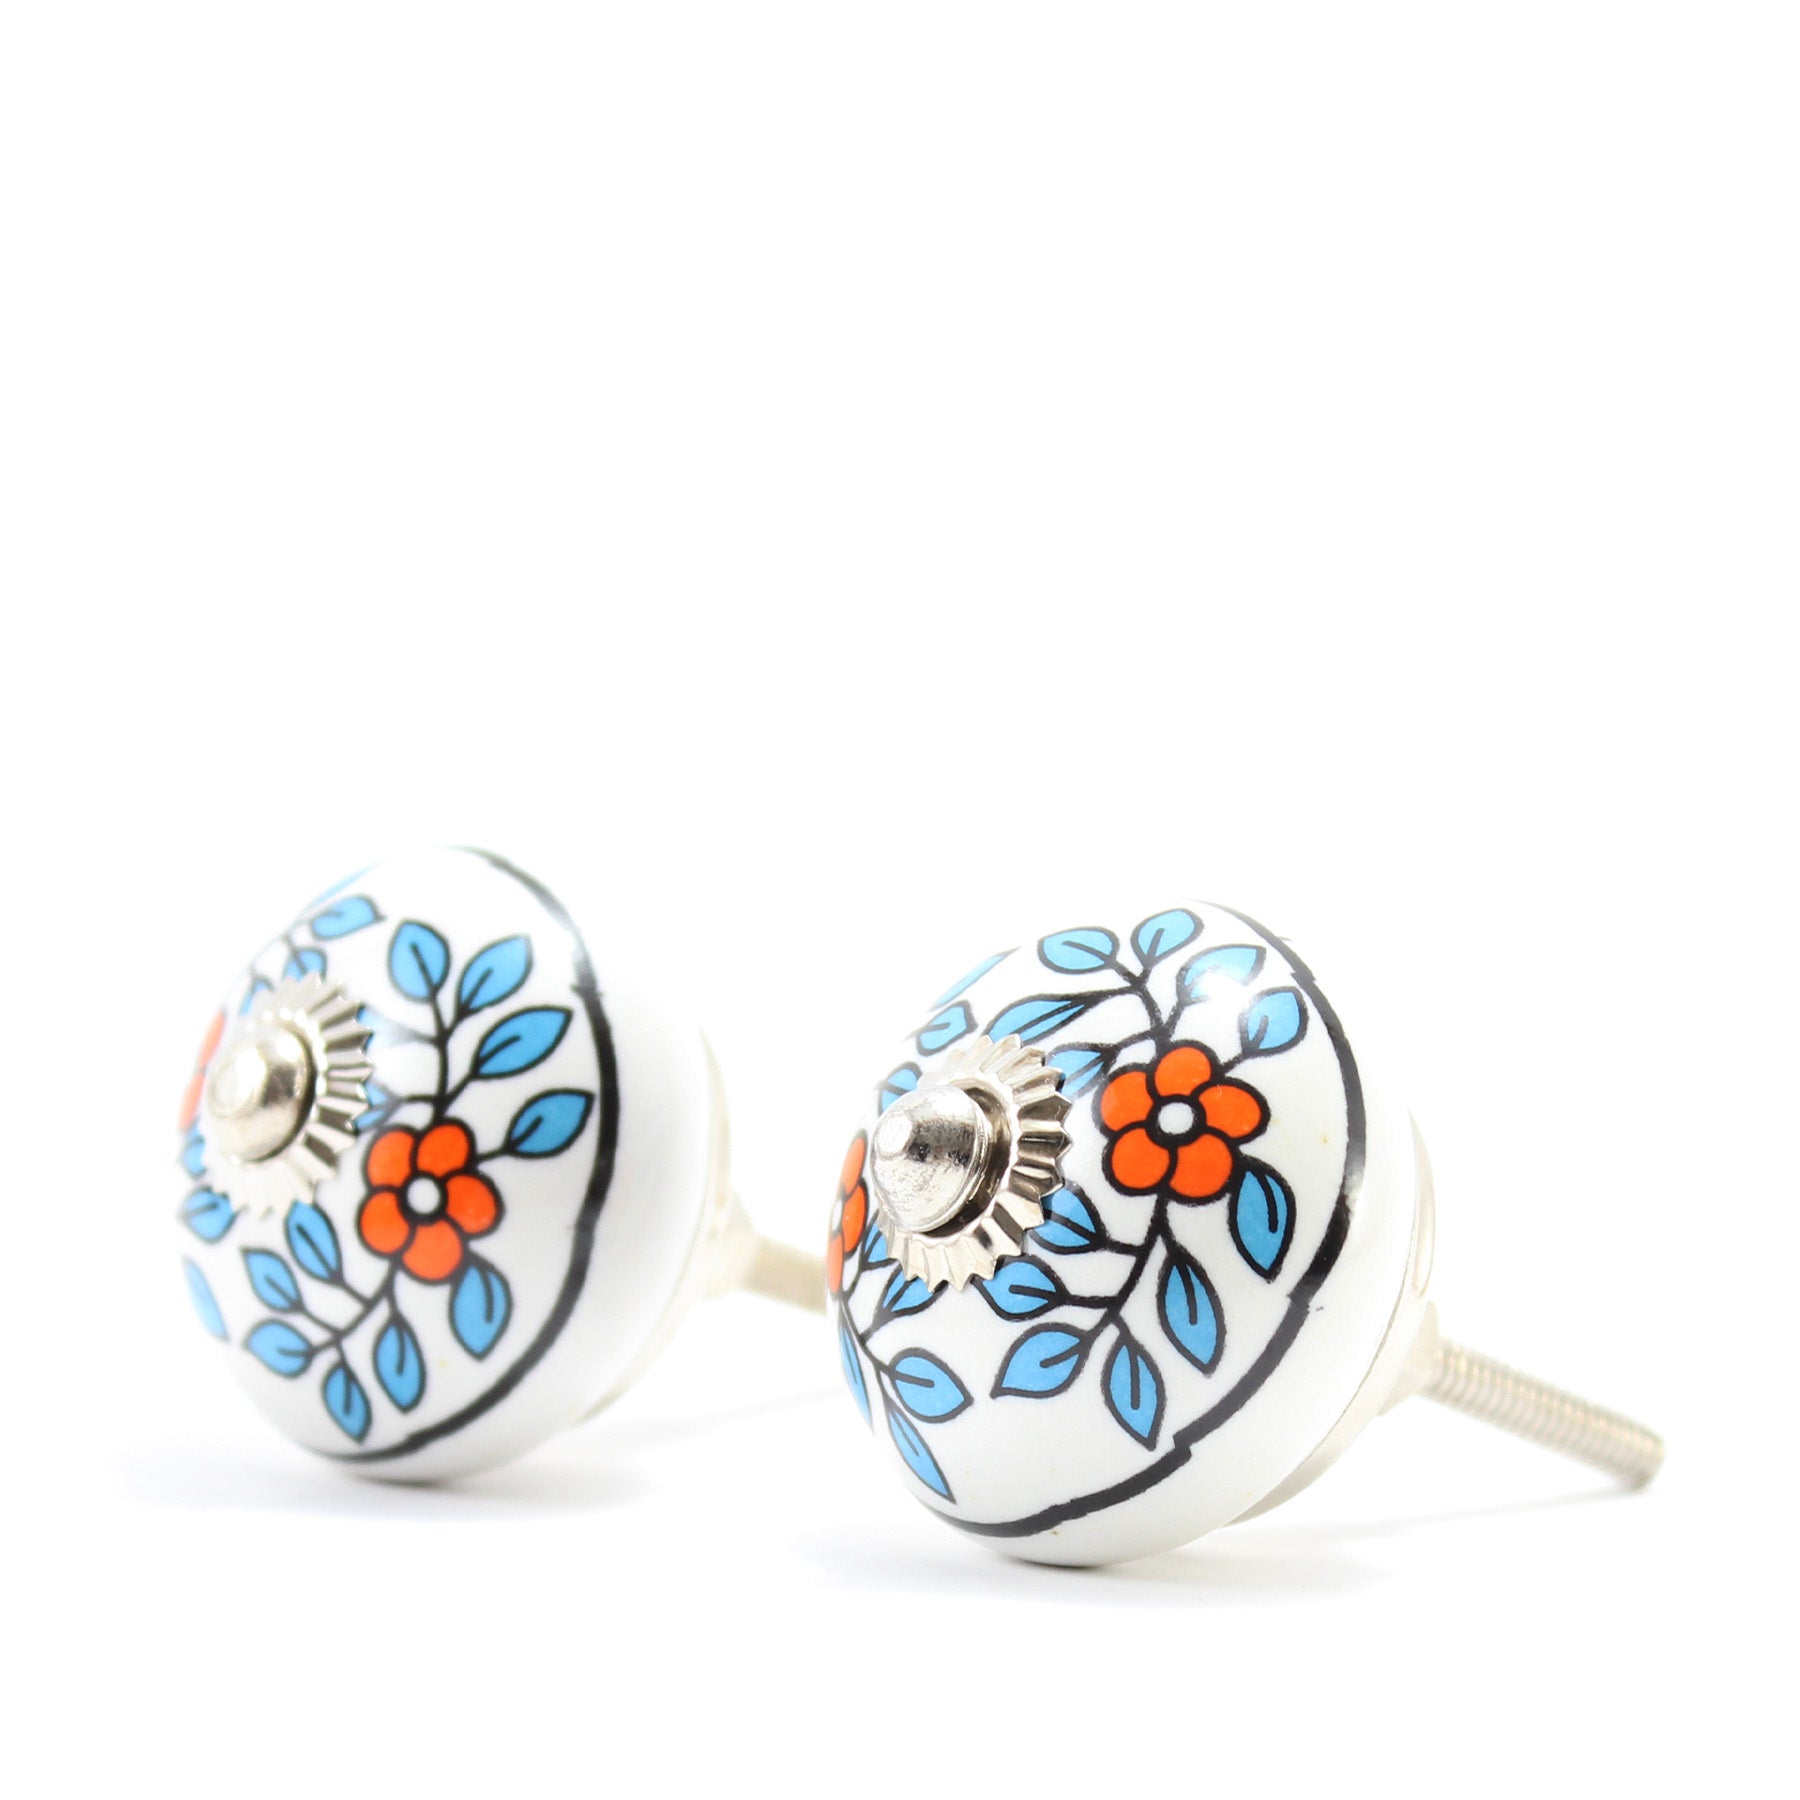 Handcrafted Ceramic Knobs III